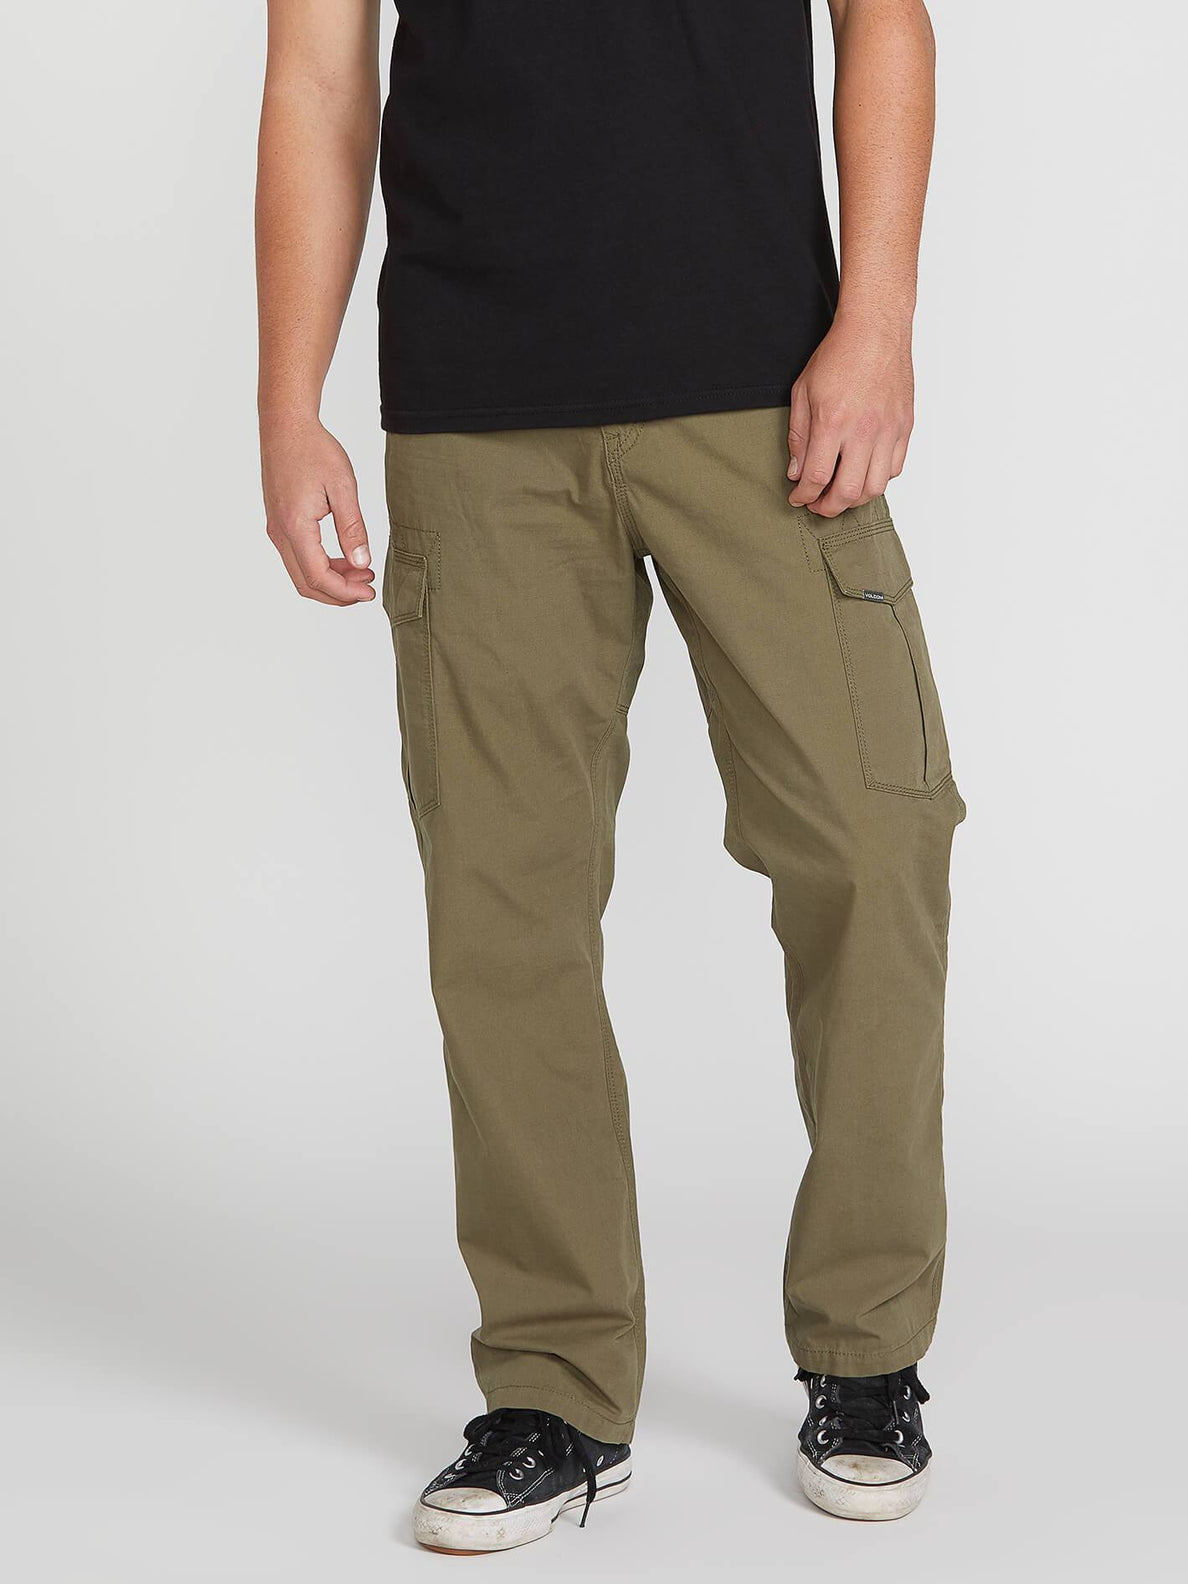 Miter Ii Cargo Pant - Army Green Combo (A1111906_ARC) [1]